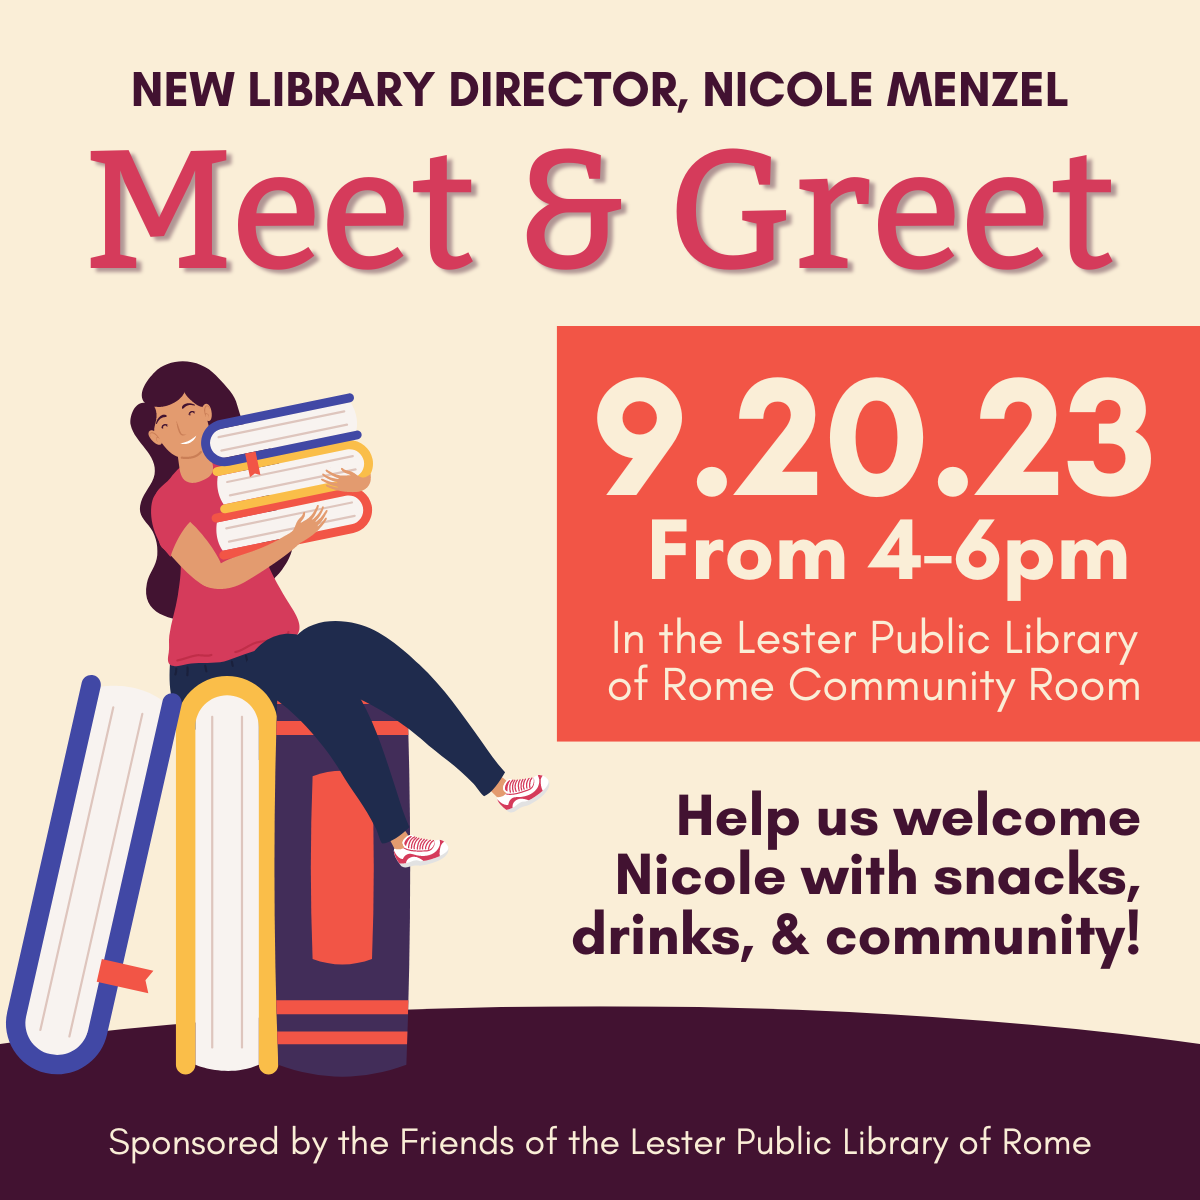 Image of cartoon woman sitting on large stack of books. Text reads: New Library Director, Nicole Menzel Meet & Greet. 9.20.23 from 4-6pm in the Lester Public Library of Rome Community Room. Help us welcome Nicole with snacks, drinks, and community! Sponsored by the Friends of the Lester Public Library of Rome.